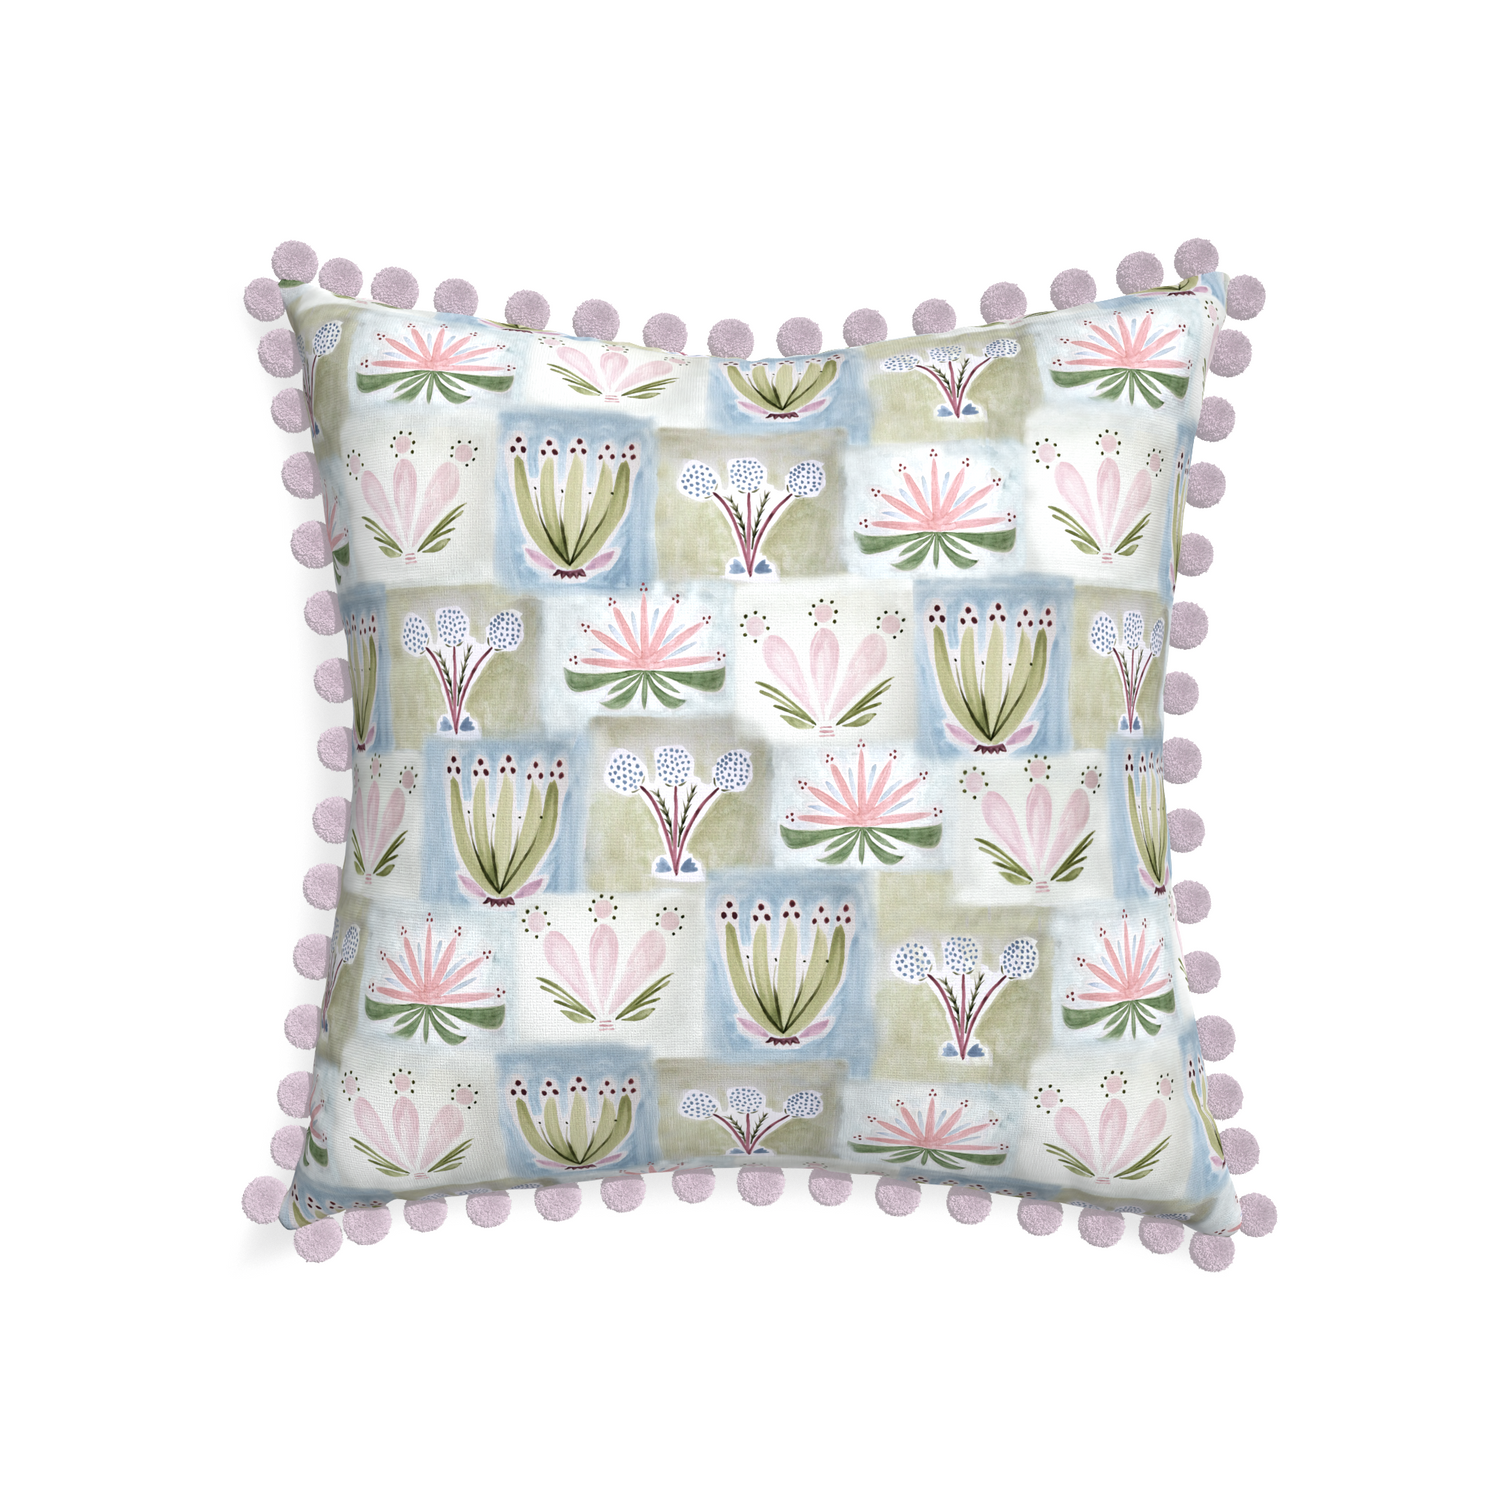 22-square harper custom hand-painted floralpillow with l on white background